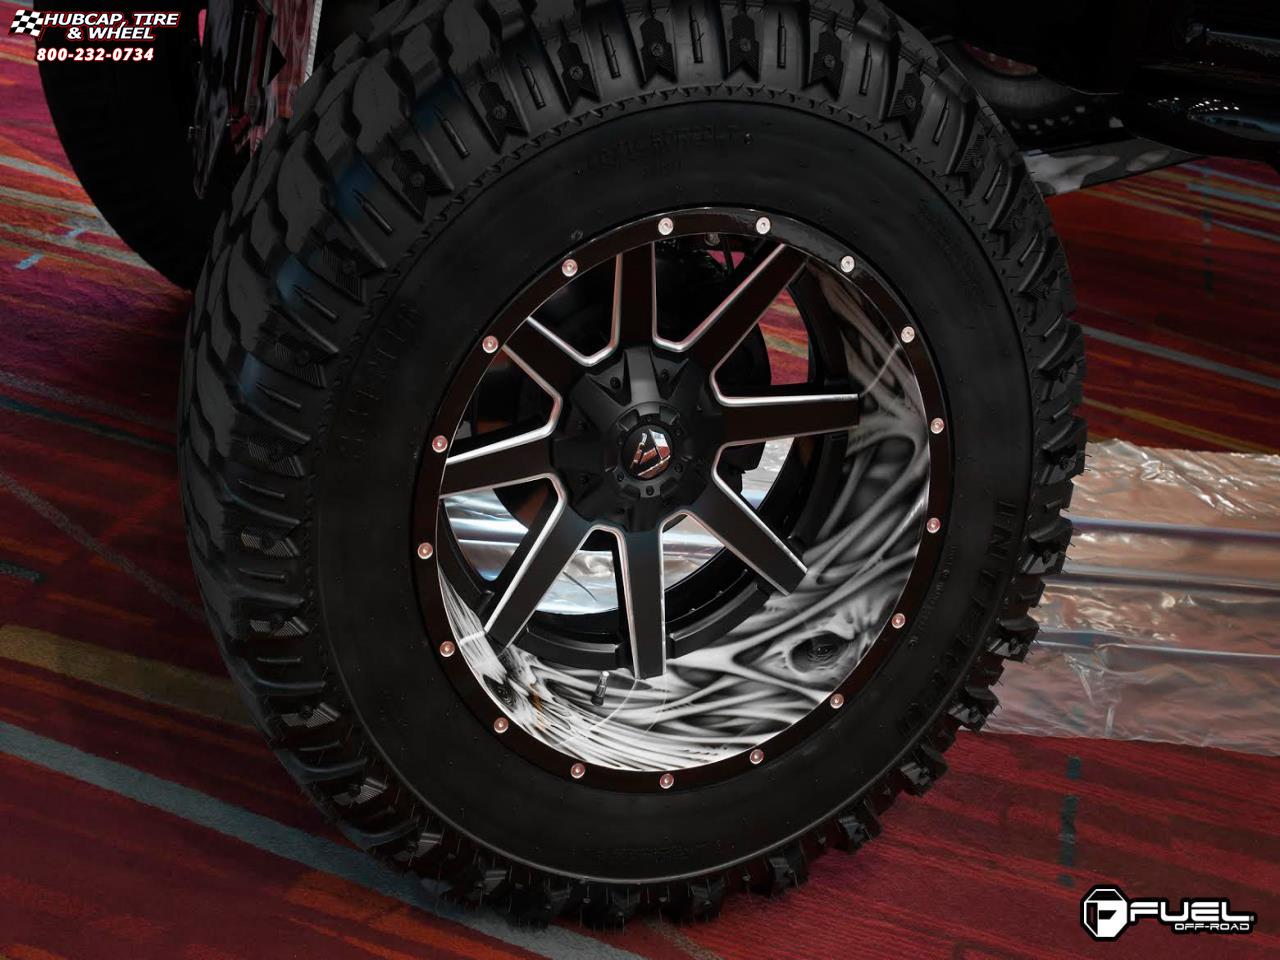 vehicle gallery/chevrolet 2500 hd fuel maverick d262 0X0  Black & Milled wheels and rims